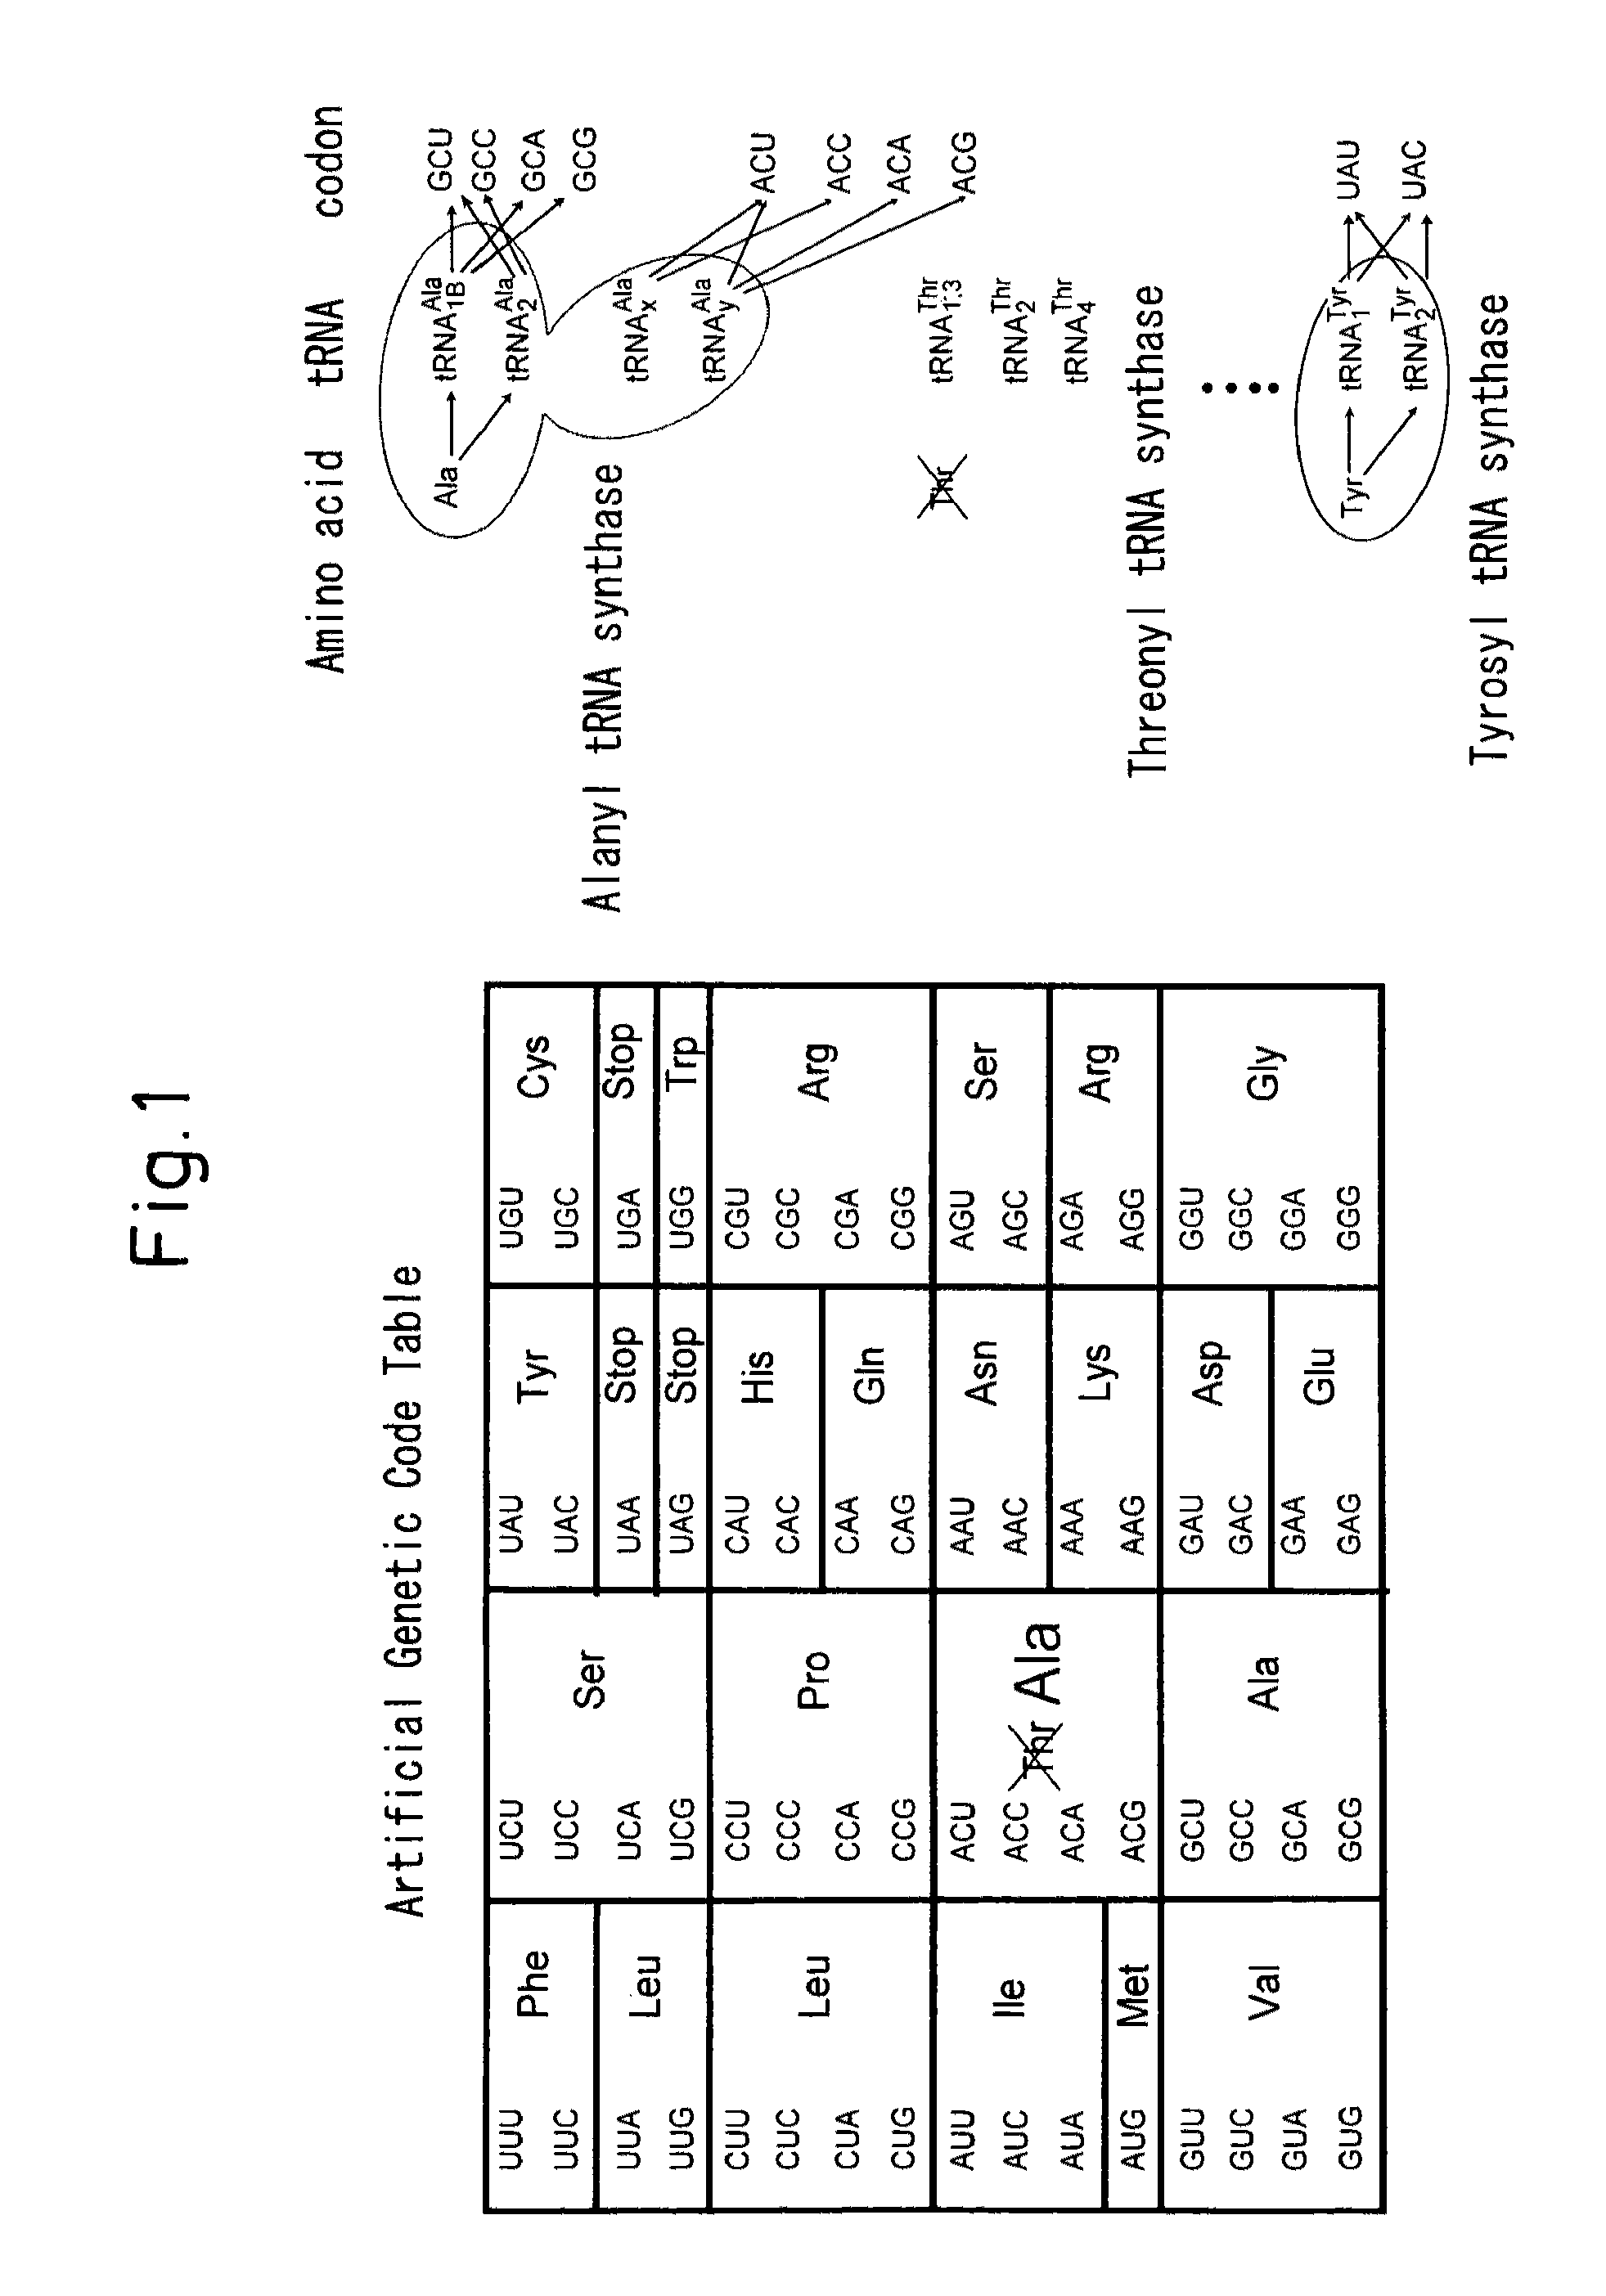 Process for producing functional non-naturally occurring proteins, and method for site-specific modification and immobilization of the proteins